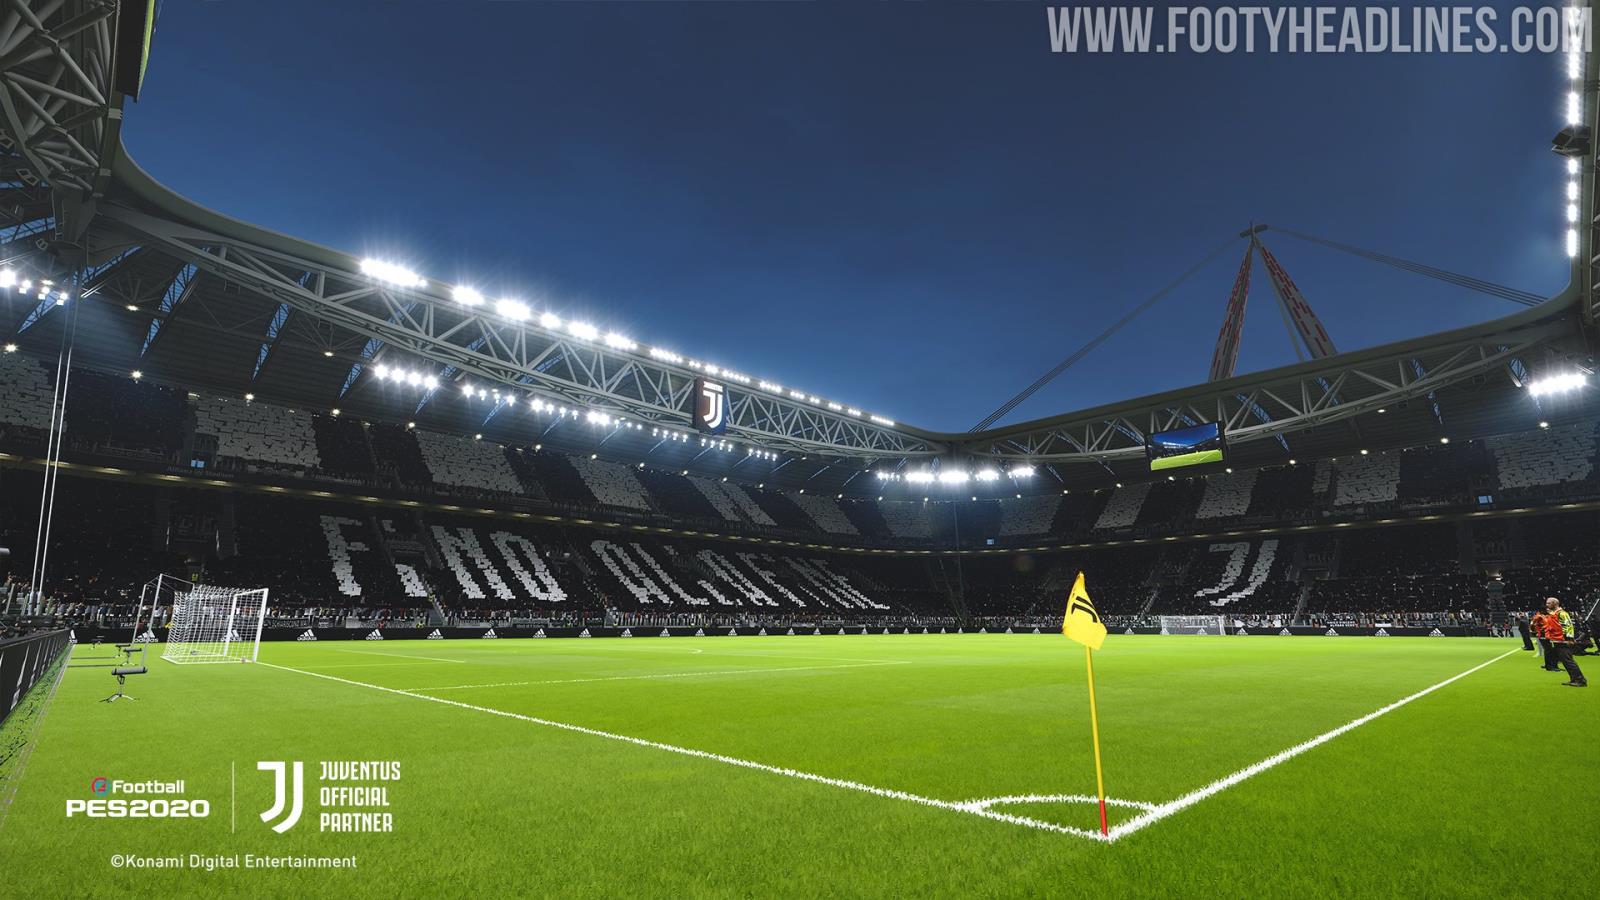 No Juve in FIFA: Juventus Announce Exclusive PES 2020 Deal - Footy Headlines1600 x 900